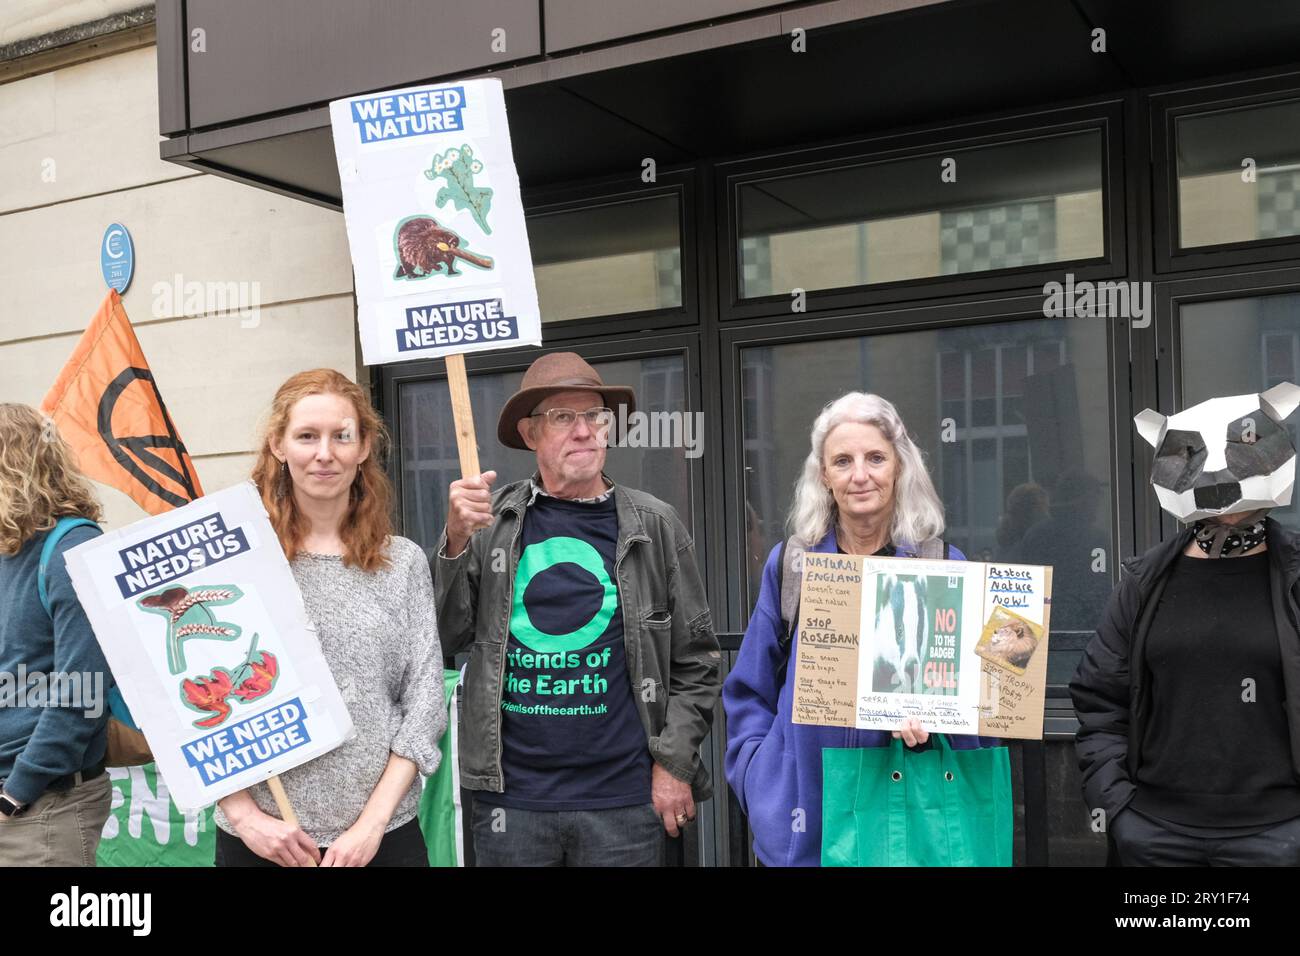 Bristol, UK. 28th Sept 2023. Environmental activists from many groups under the banner of Restore Nature Now protest the inaction of DEFRA and therefore the Government’s non commitment to protect the environment. Pictured are the very peaceful protestors outside the DEFRA office in Bristol. Credit: JMF News/Alamy Live News Stock Photo